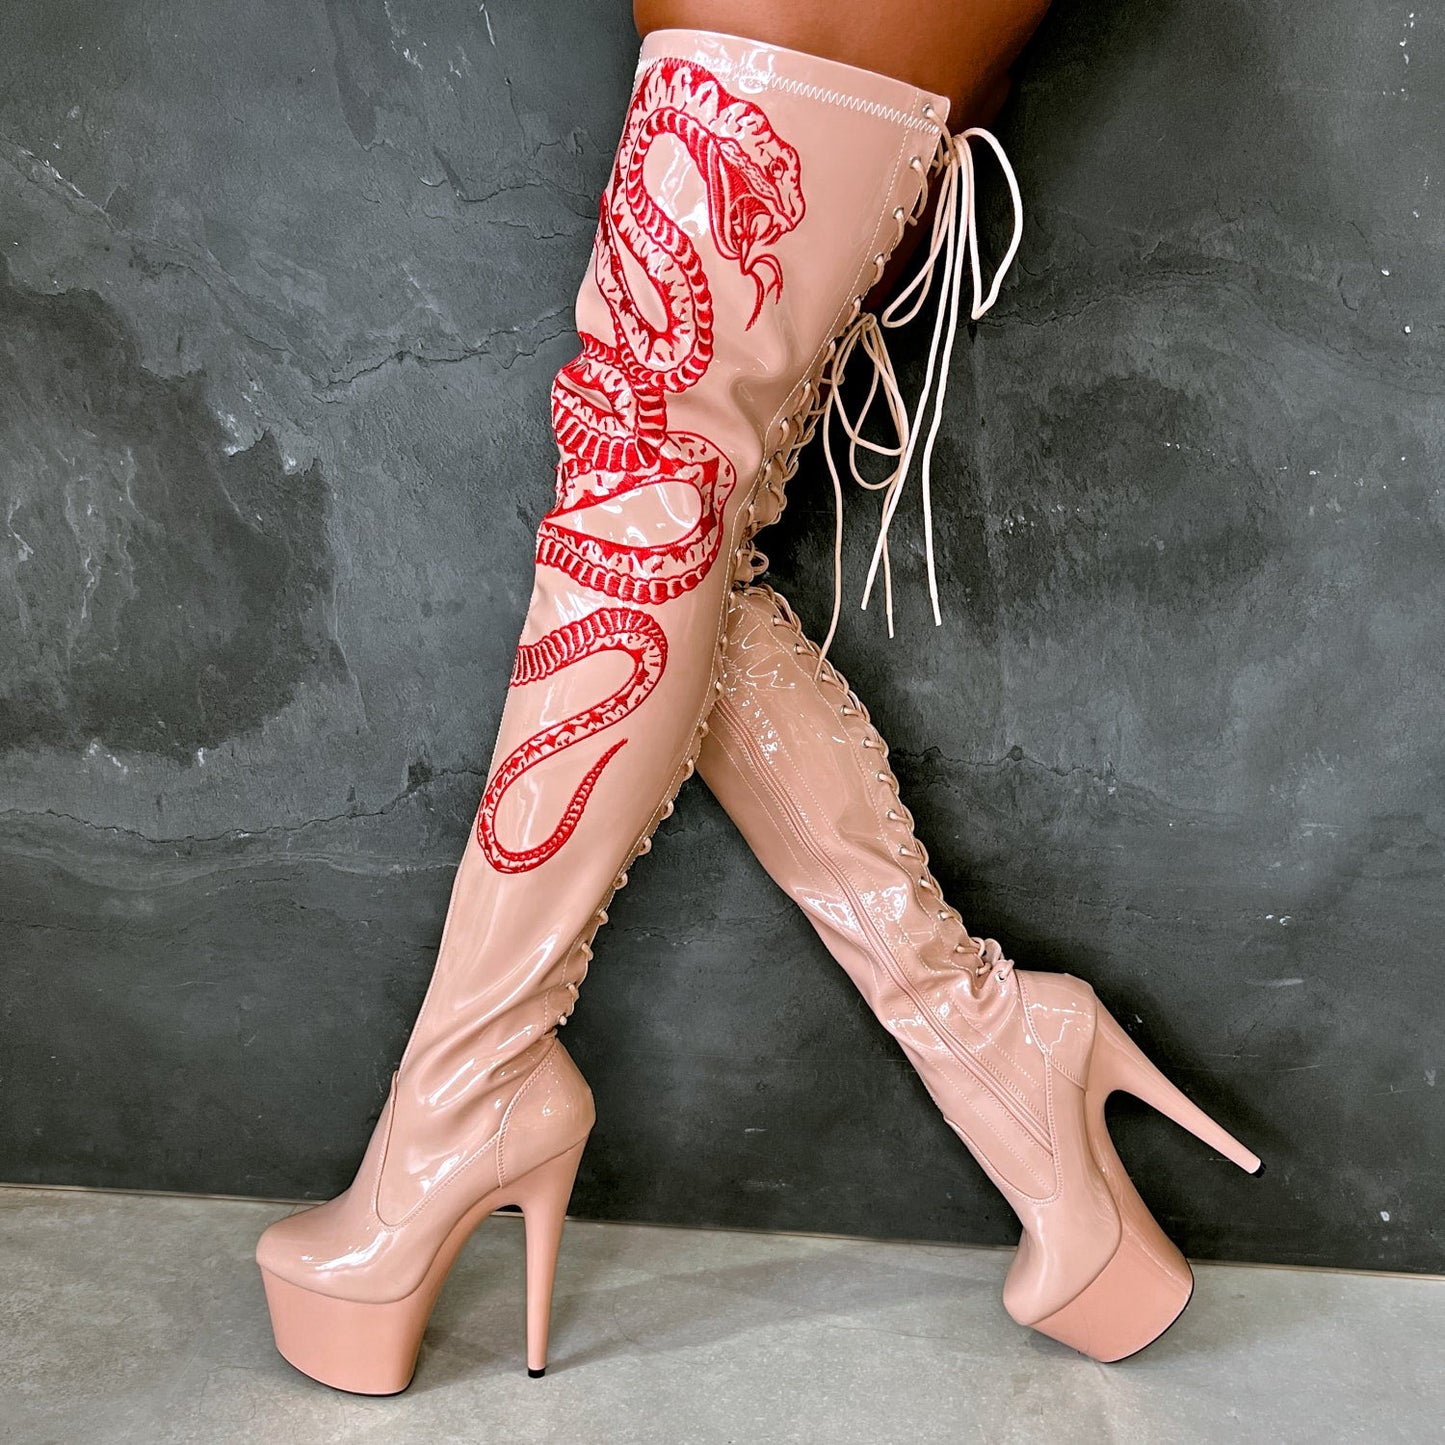 VIPER Boot Tan with Red Thigh High - 7INCH